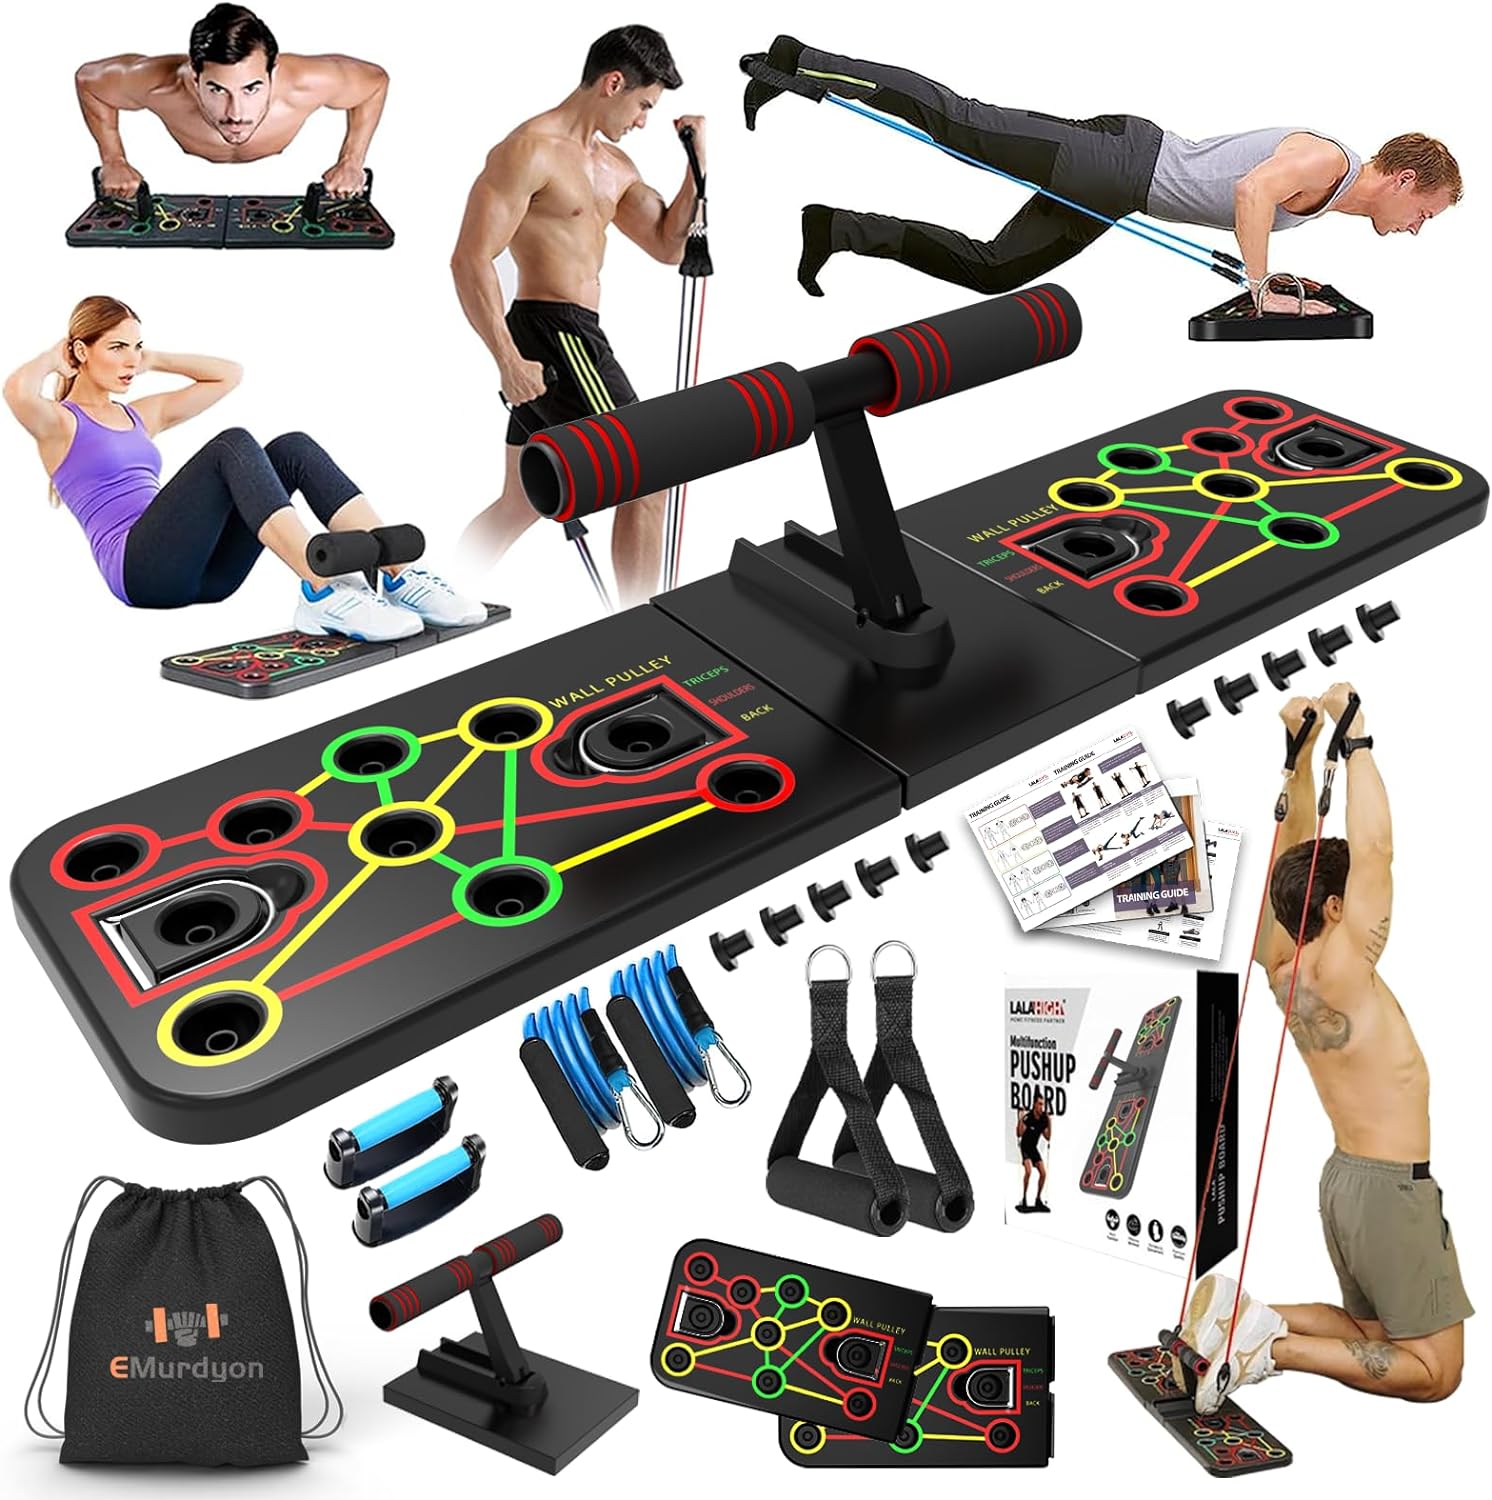 New Upgraded Portable Home Gym with Sit-up Stand, Push Up Board, Premium Resistance Bands, 35-in-1 Multifunctional Strength Training Equipment, Home Fitness for Men and Women